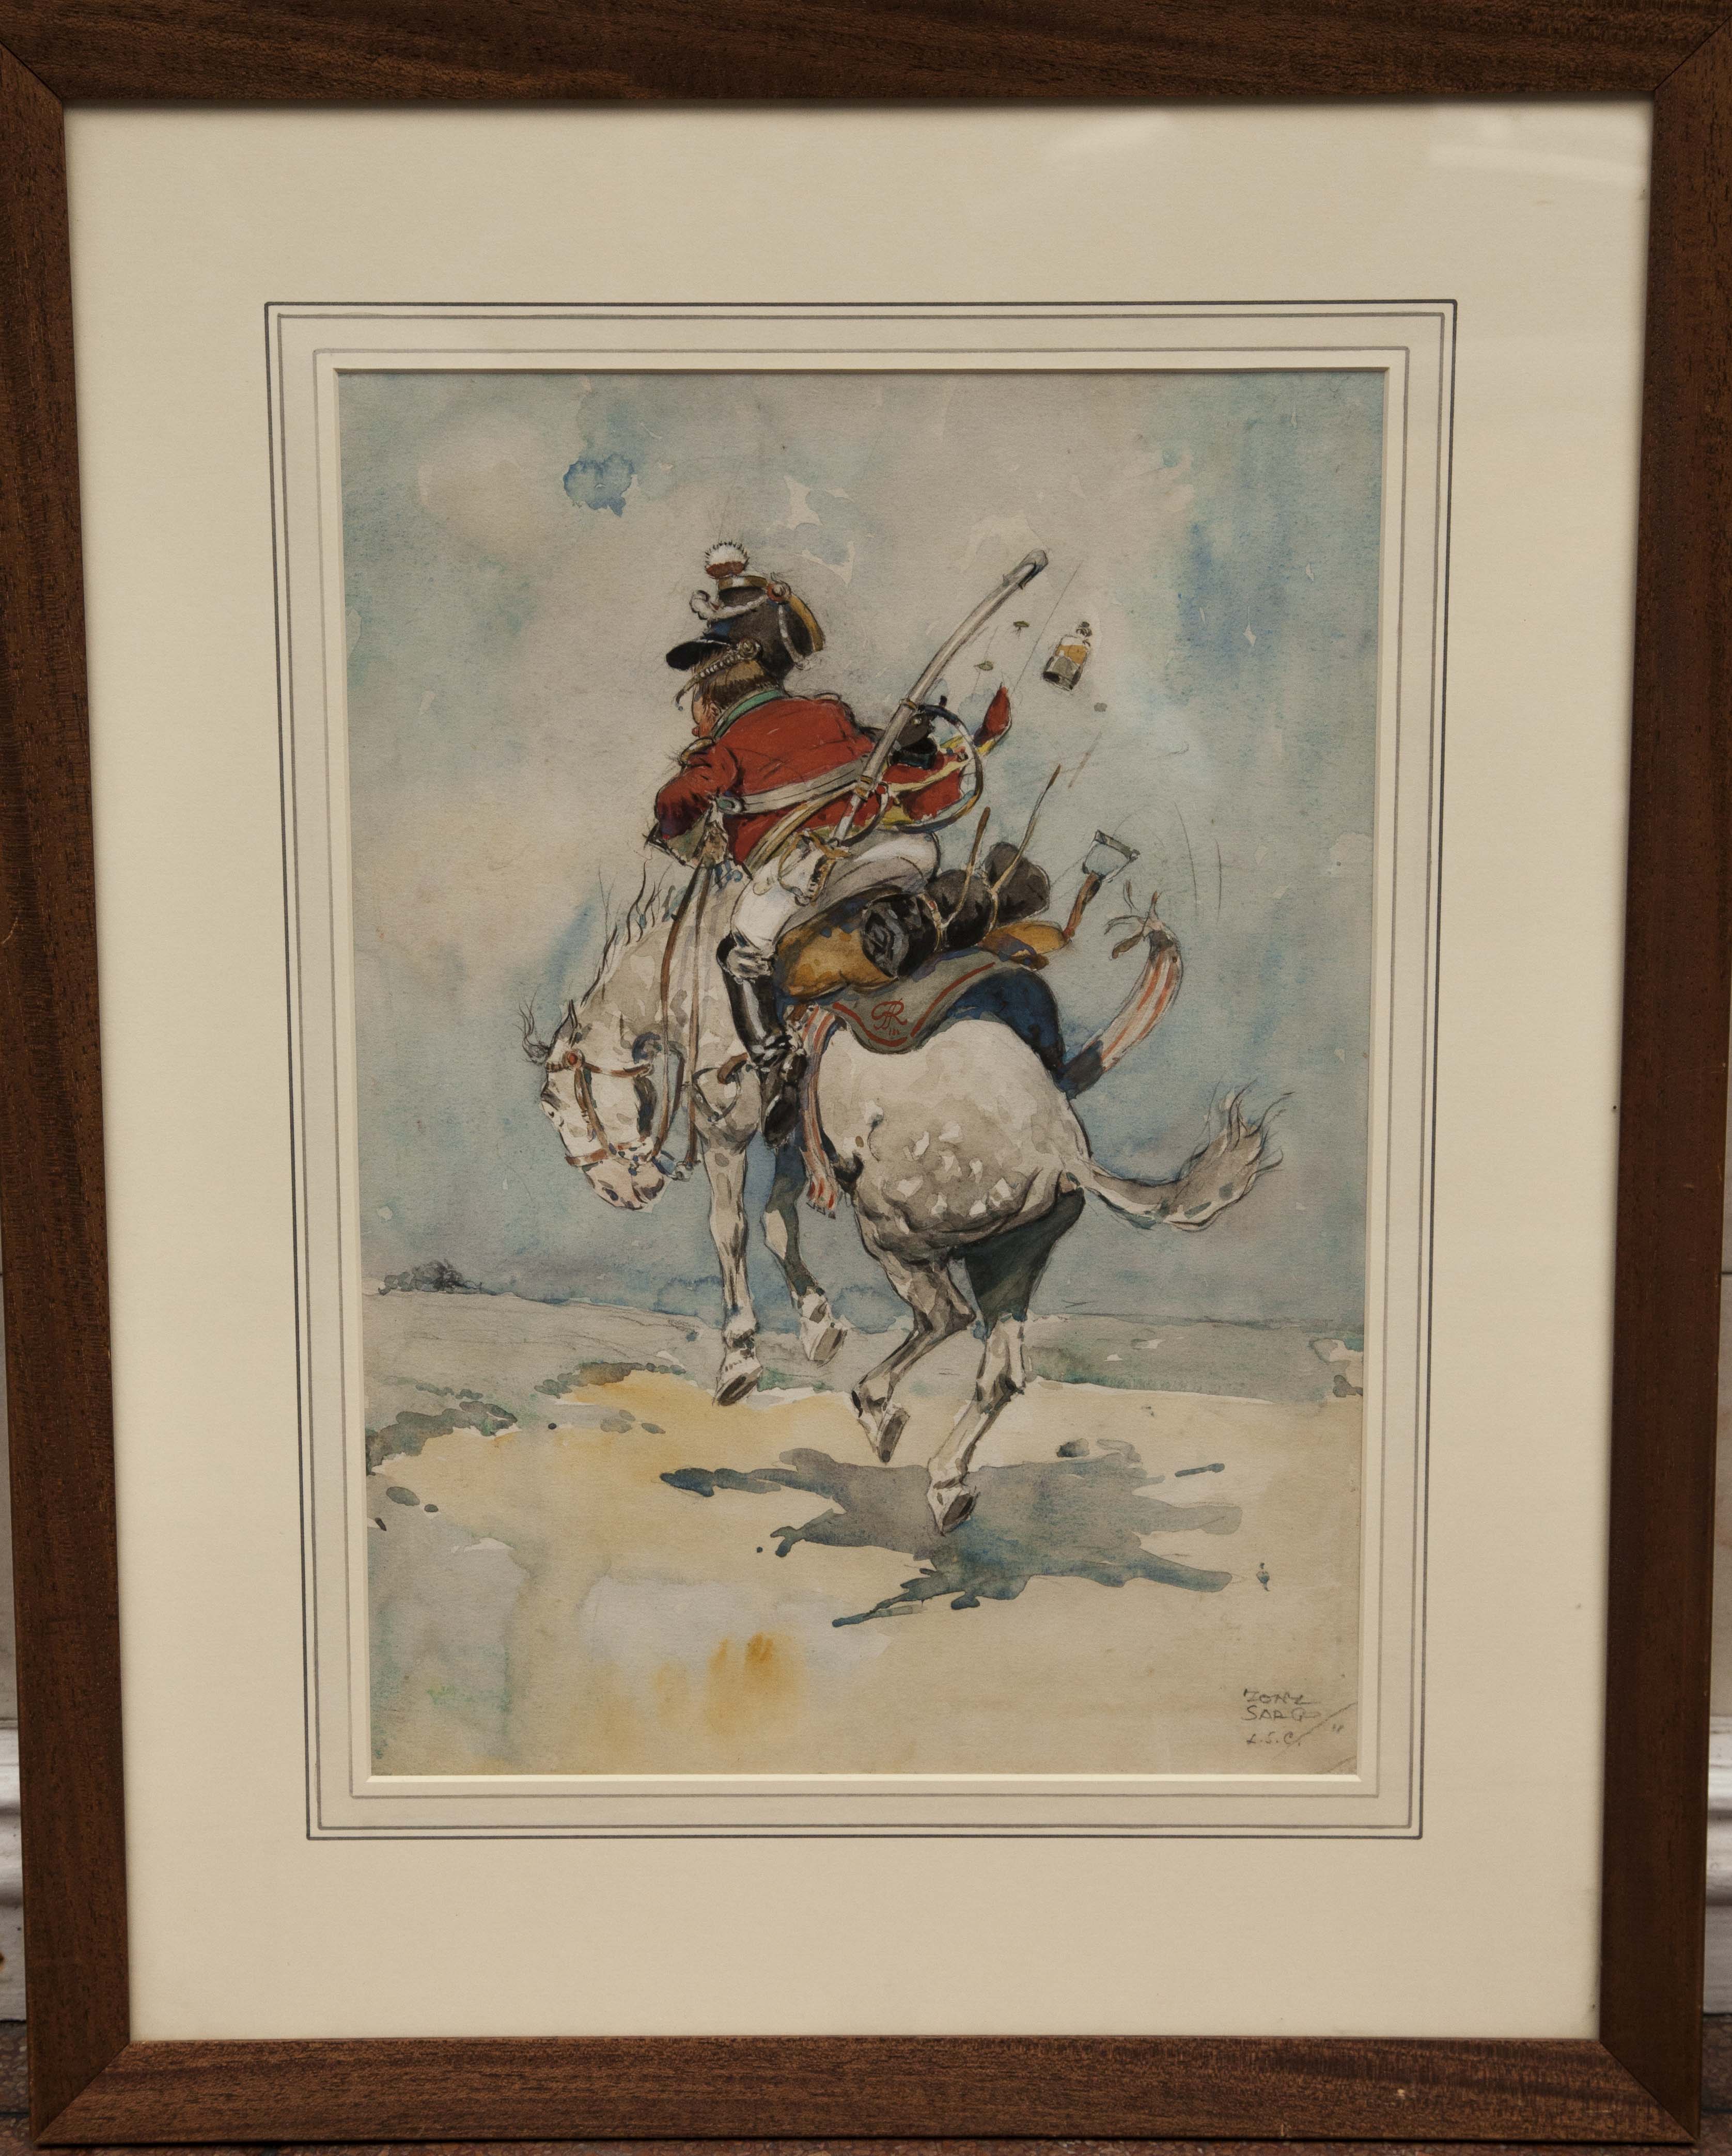 TONY SARG, U.S. COMMERCIAL ARTIST, 1882 - 1942, WATERCOLOUR Titled 'Military Mayhem', signed with